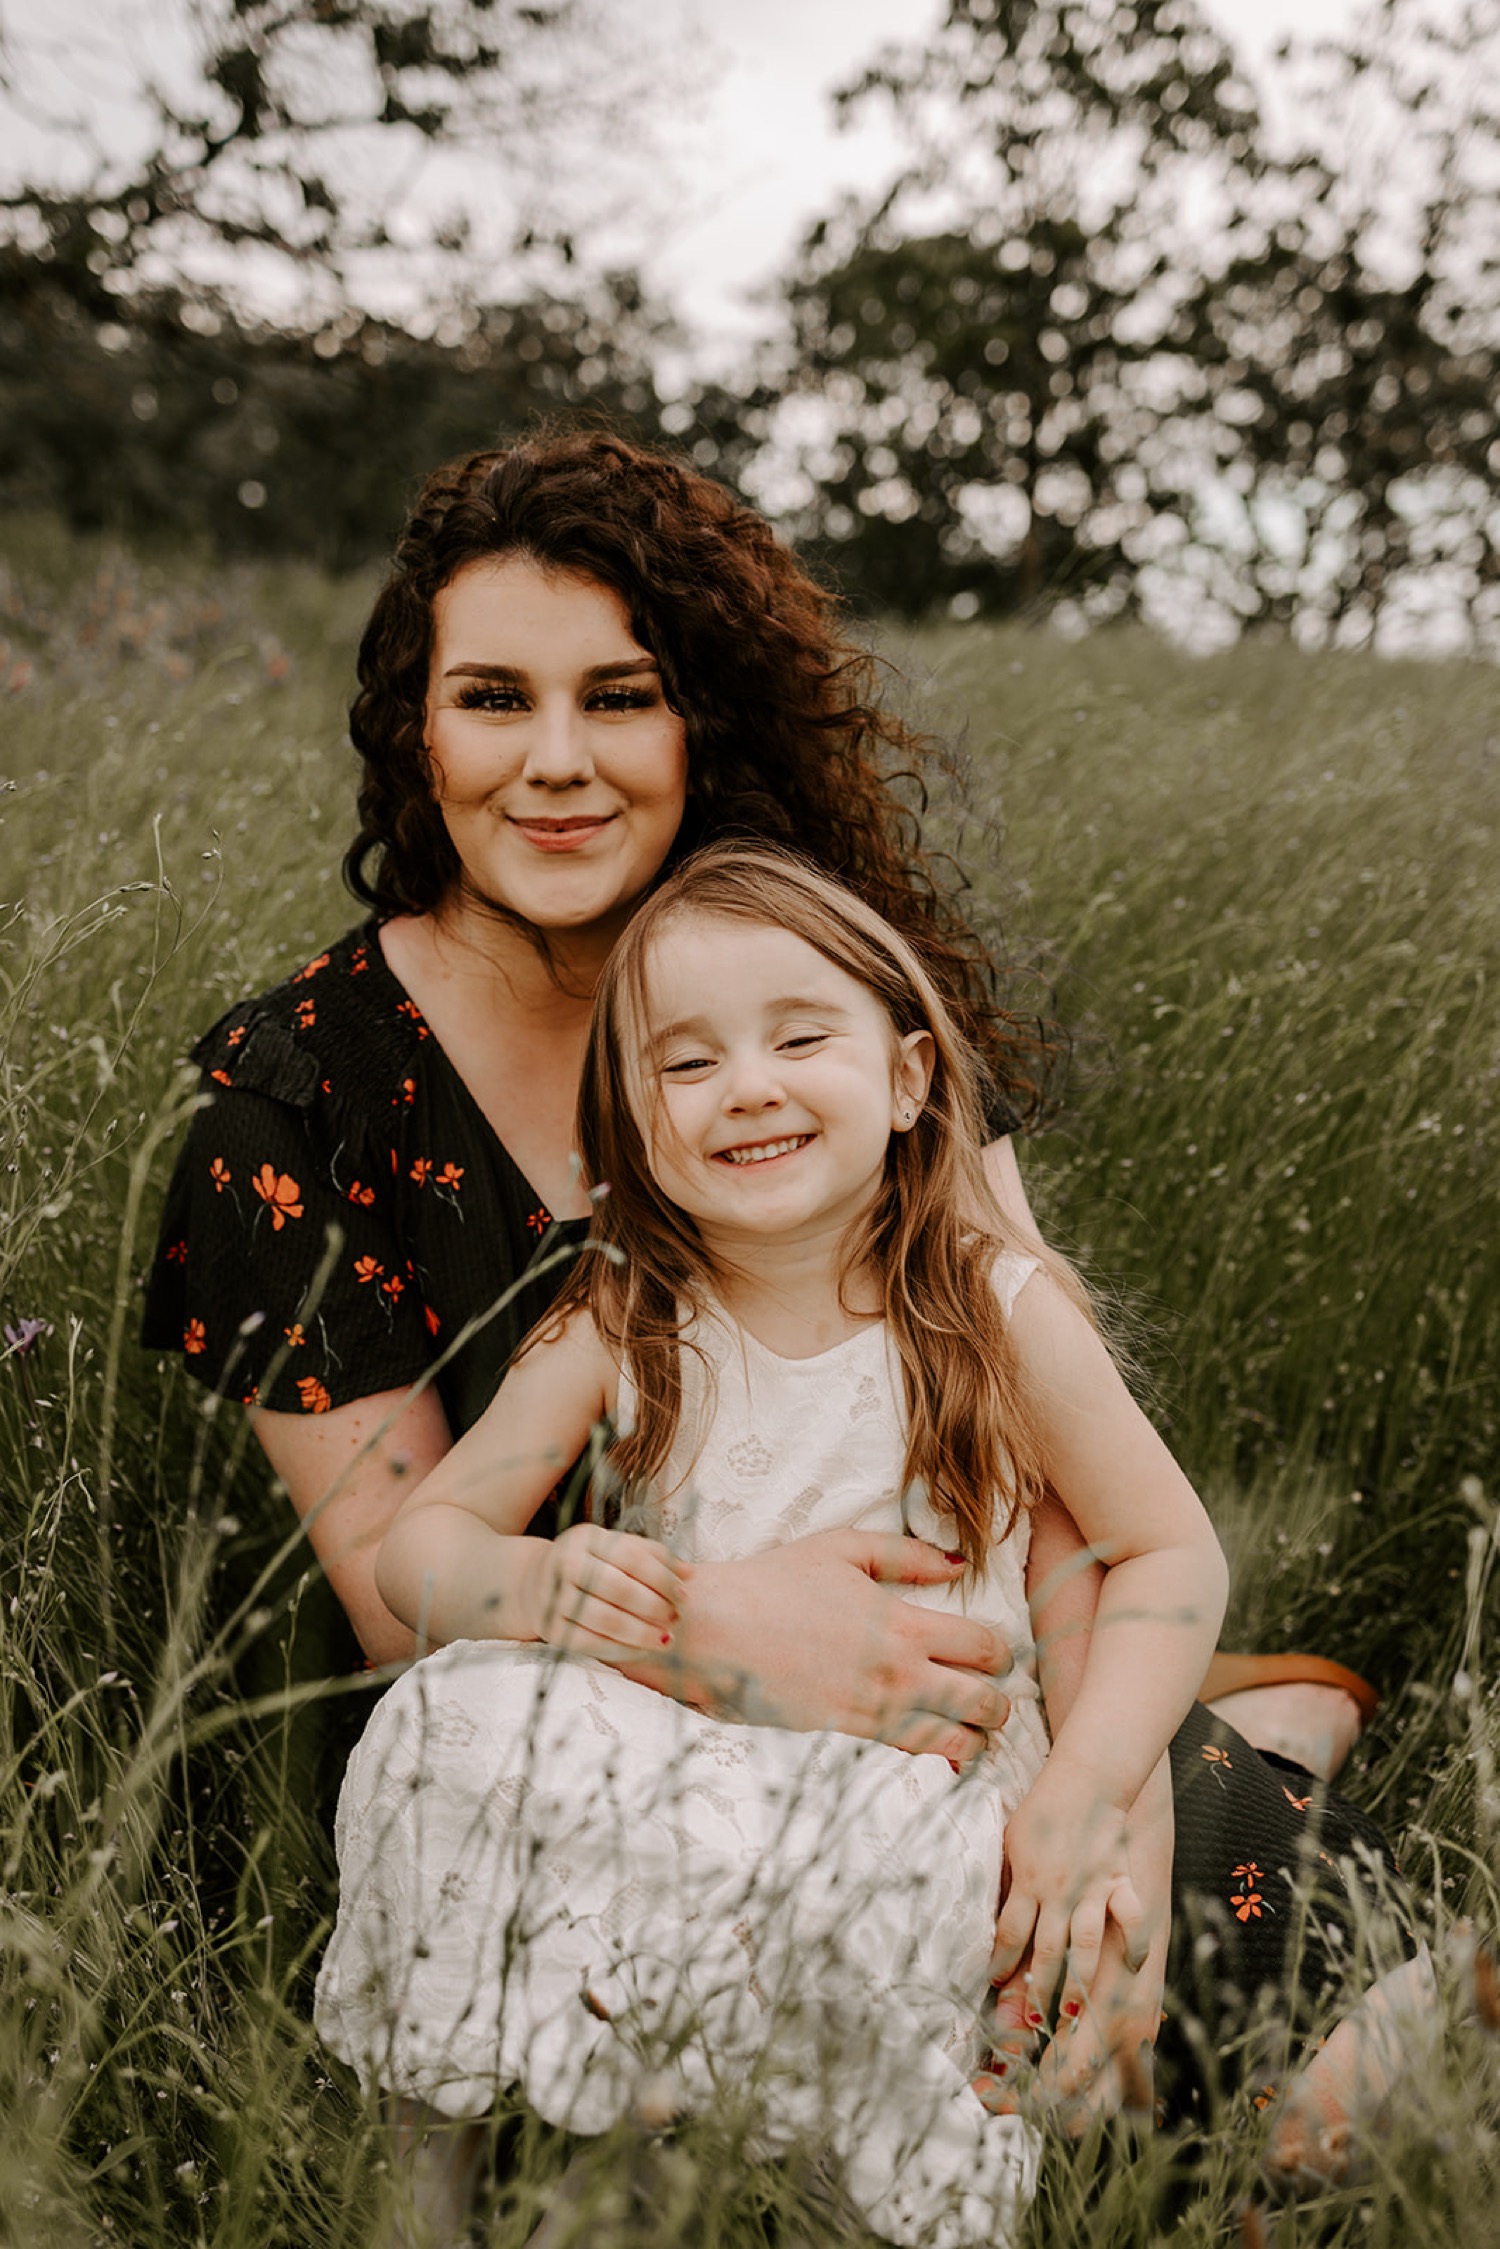 Best Mother Daughter Photoshoot Ideas and Tips | Mother daughter  photoshoot, Mother daughter photography poses, Mother daughter pictures